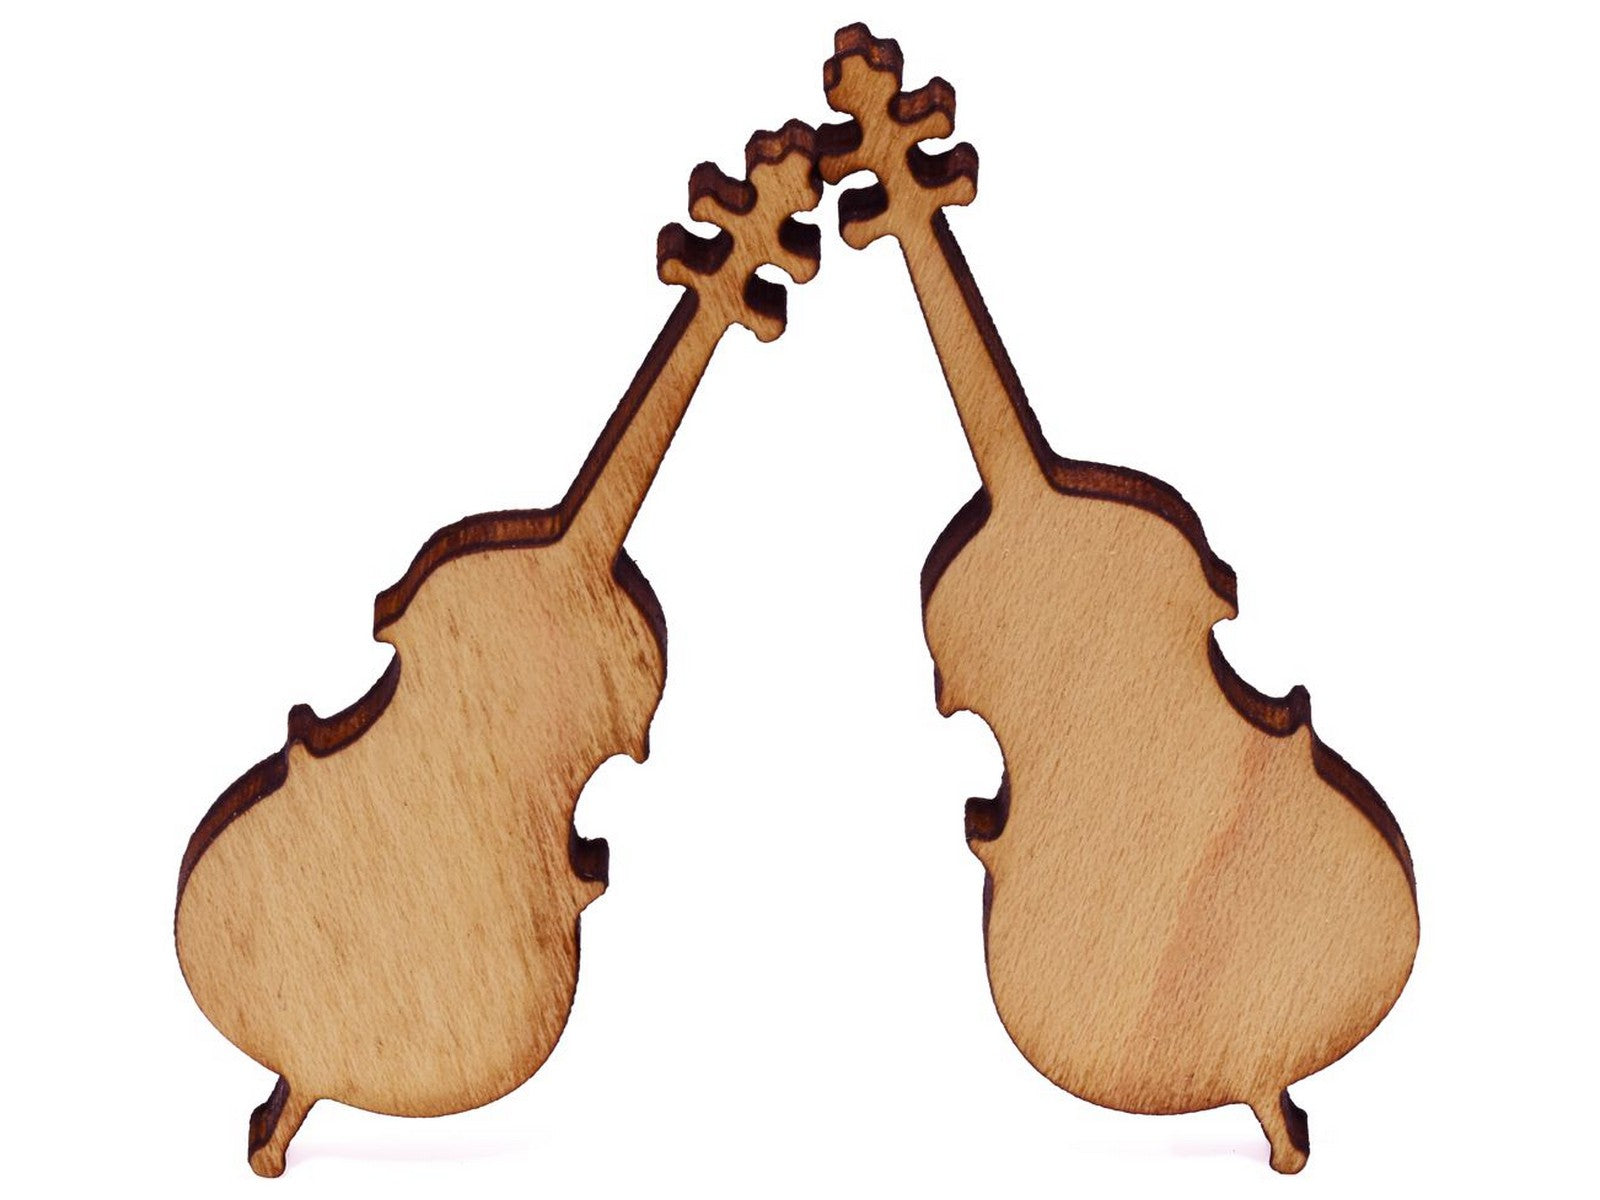 A closeup of pieces showing two cellos.